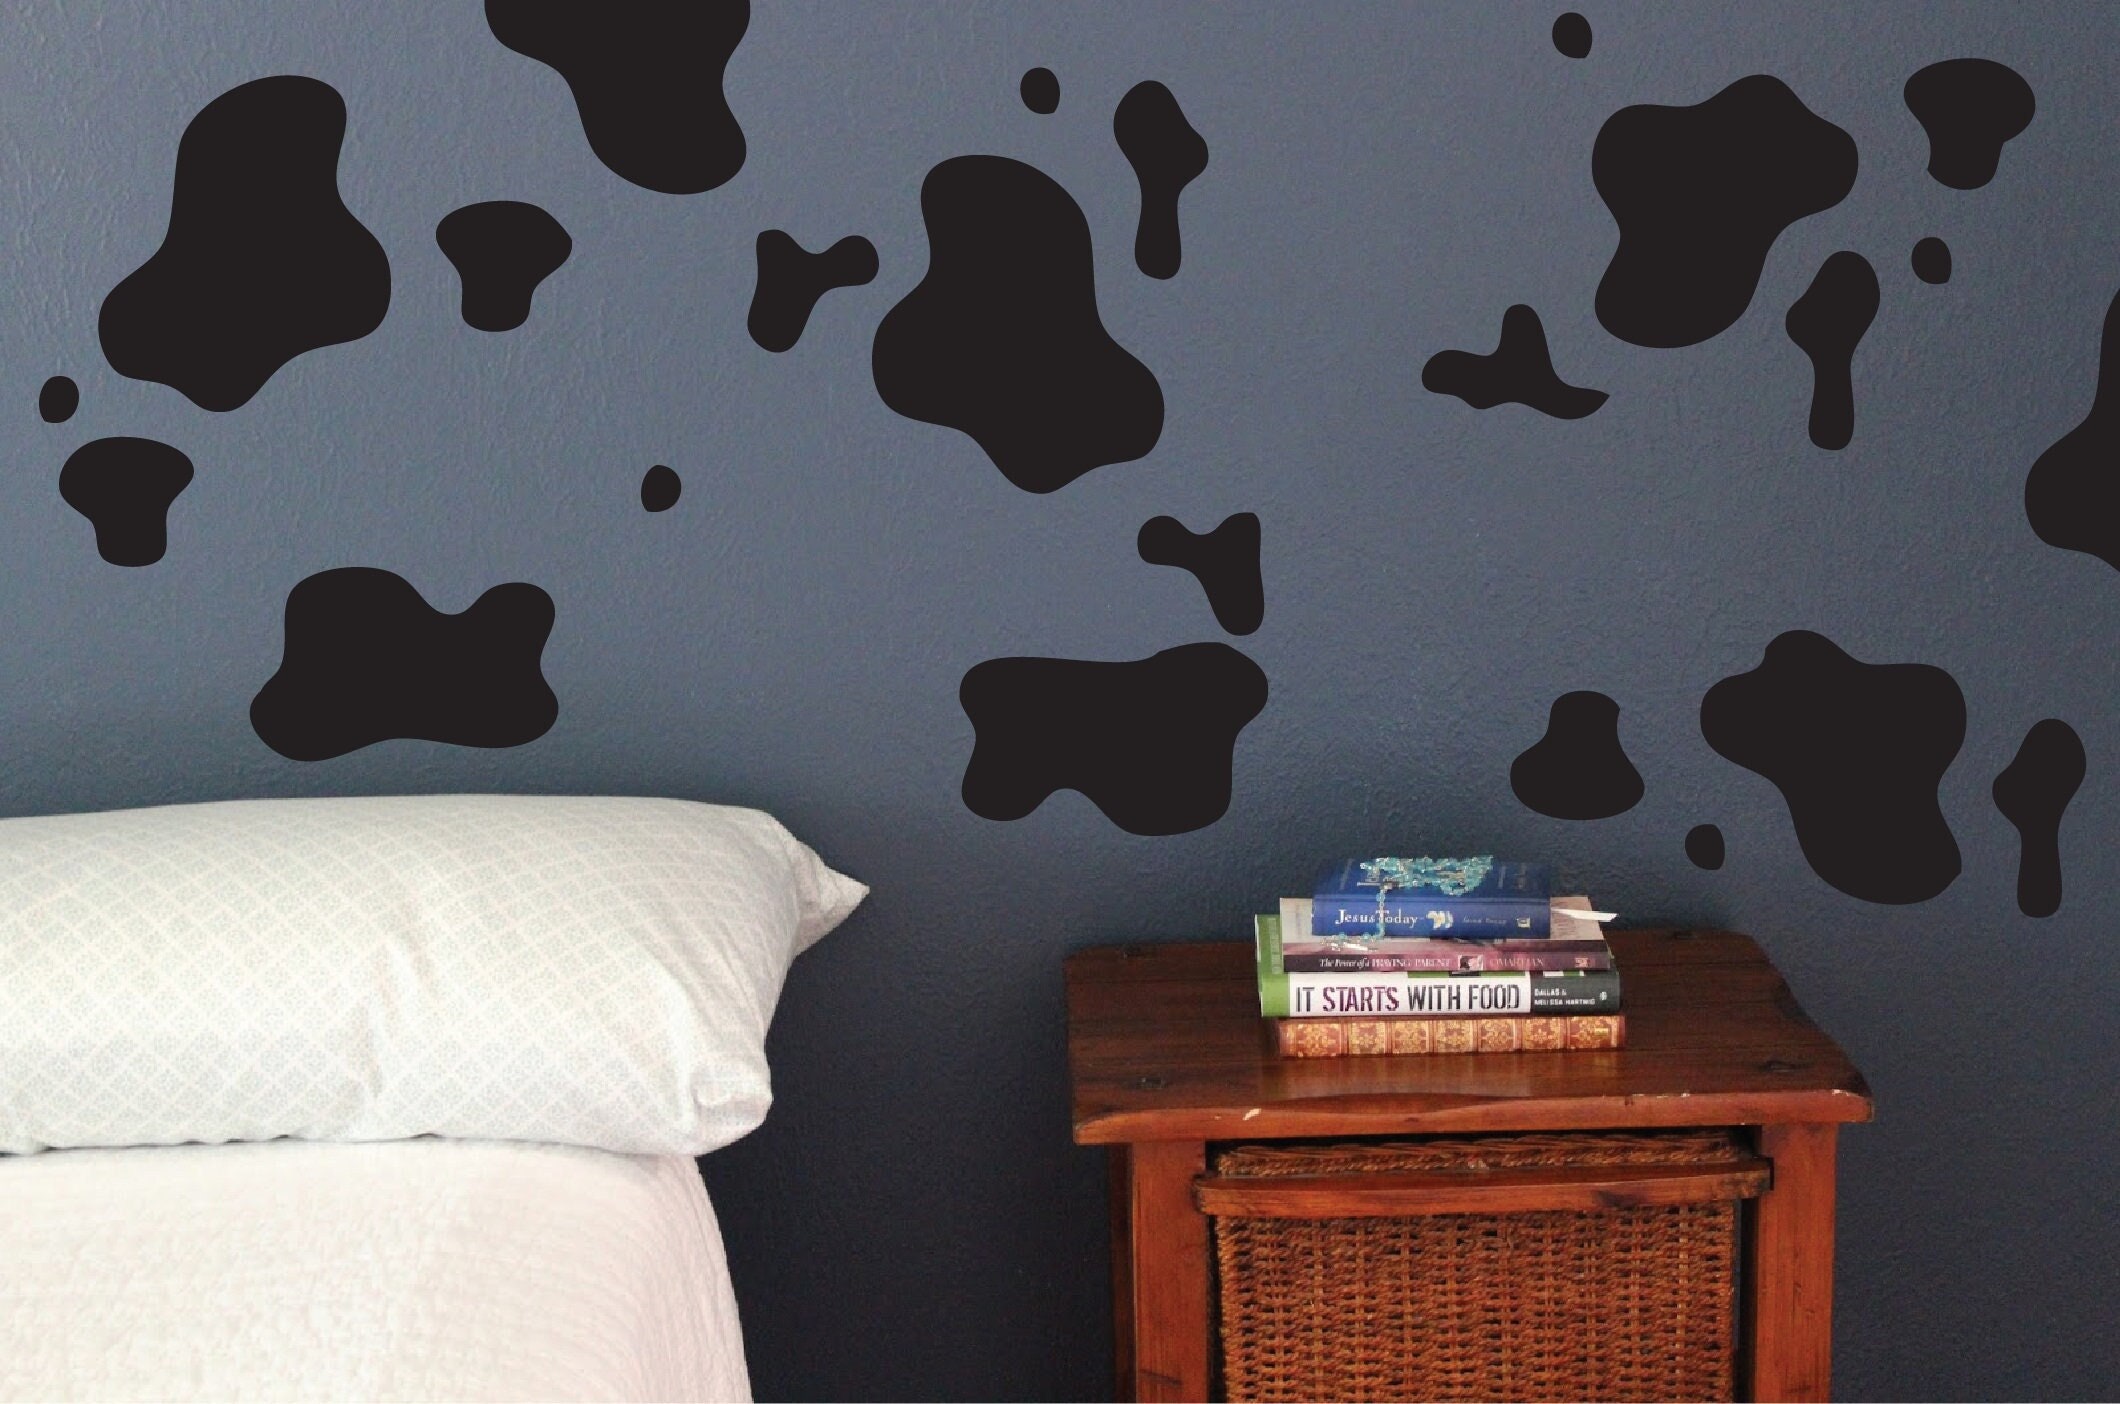 184 Pieces Cow Print Decor, Adhesive Cow Print Stickers Cow Print Vinyl  Wall Art Decal Removable Cow Print Wall Decor Waterproof Animal Design Cow  Decals for Walls Bedroom Living Room Nursery, Black